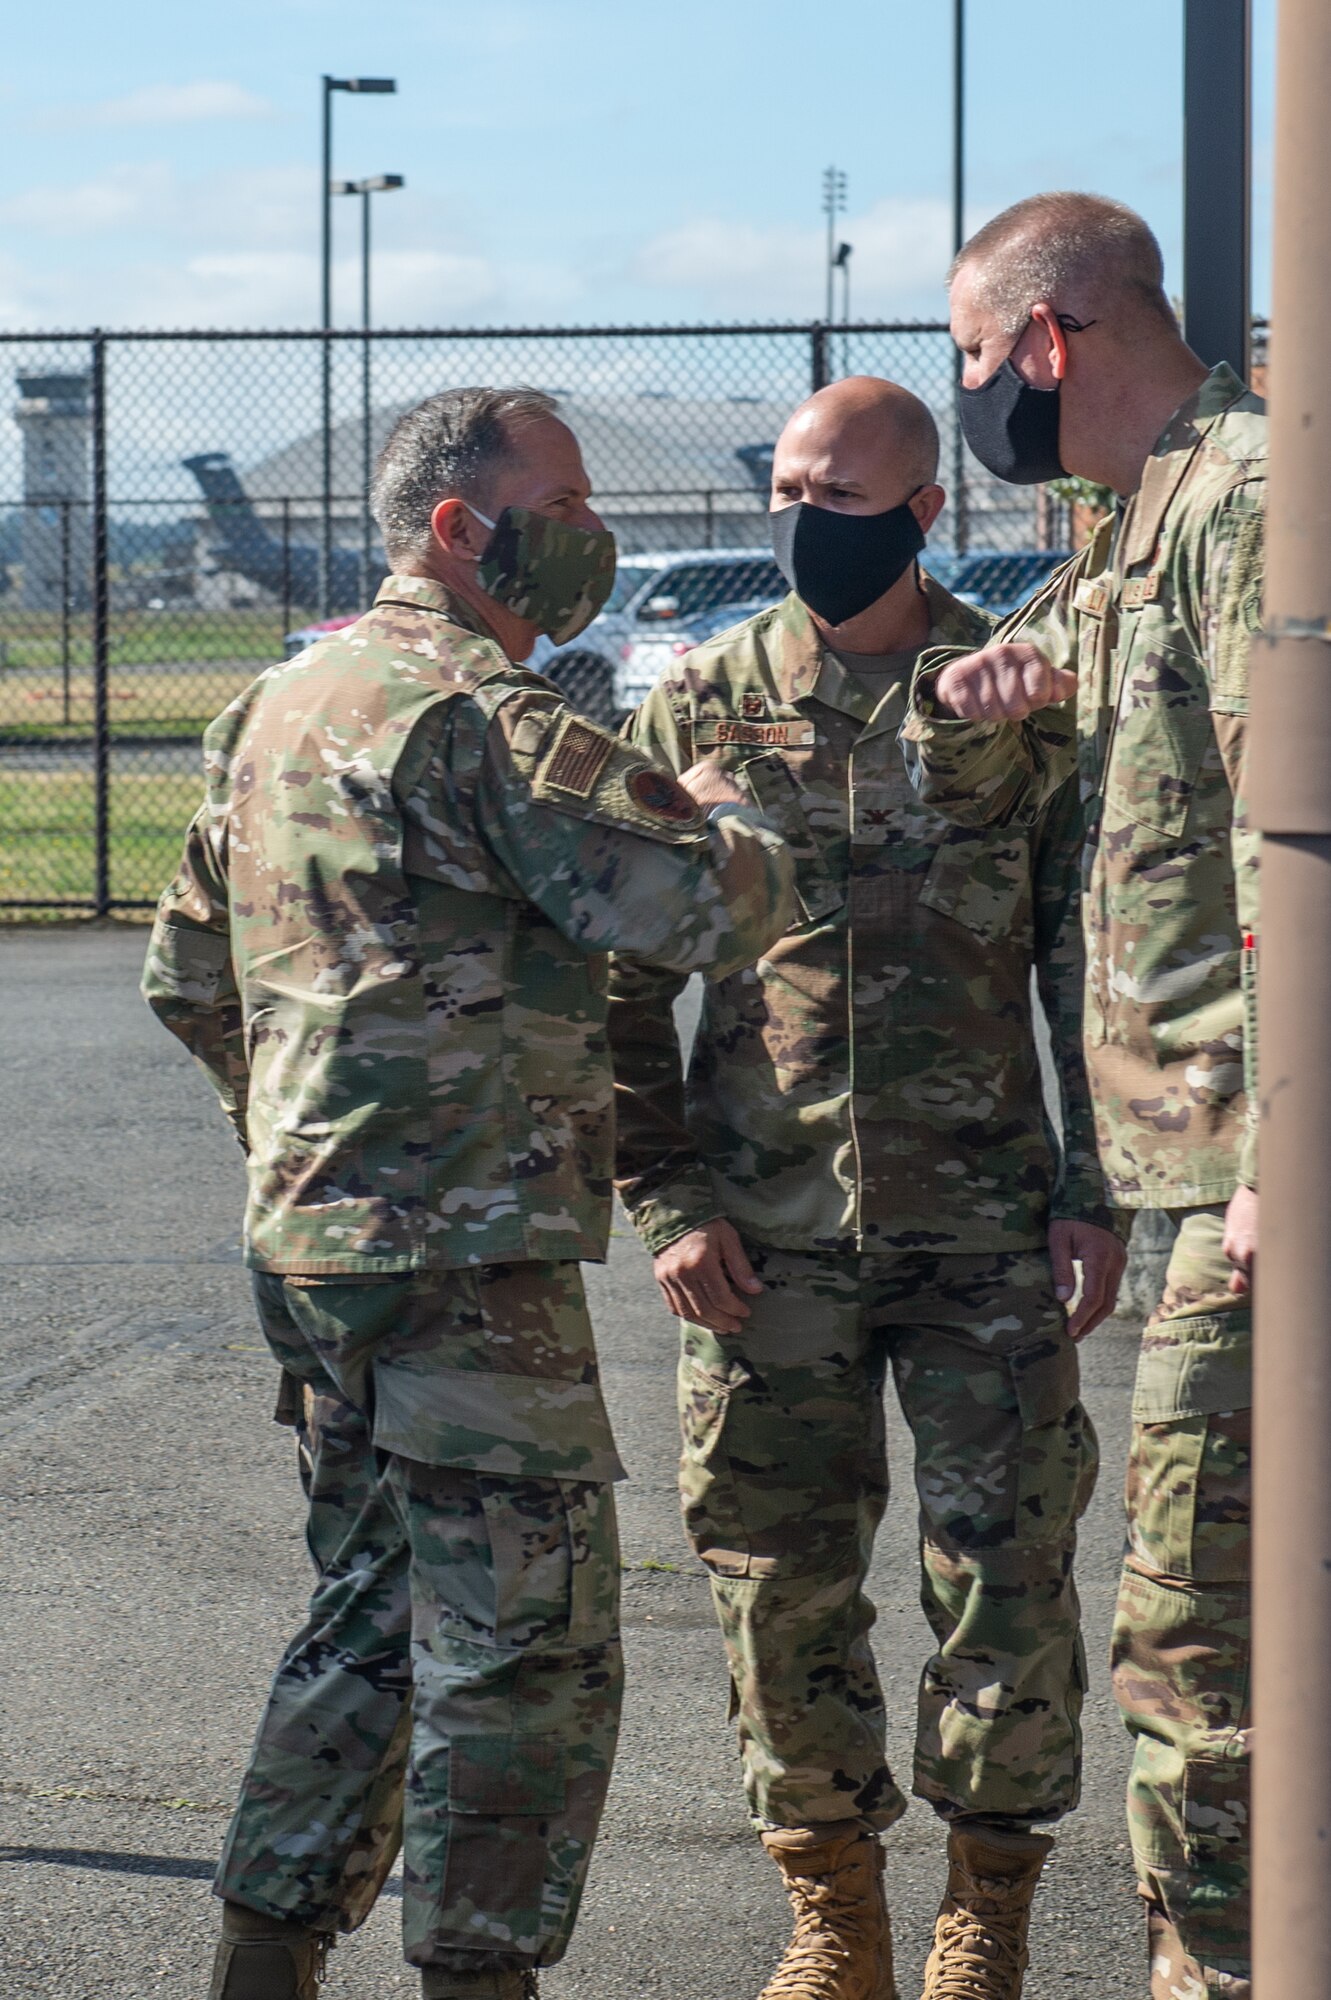 Chief Master Sgt. John Lipsey, 62nd Maintenance Group command chief, right, and Col. Aaron Sasson, 62nd Maintenance Group commander, center, greet Gen. David Goldfein, chief of staff of the Air Force at Joint Base Lewis-McChord, Wash., June 18, 2020. (U.S. Air Force photo by Senior Airman Sara Hoerichs)